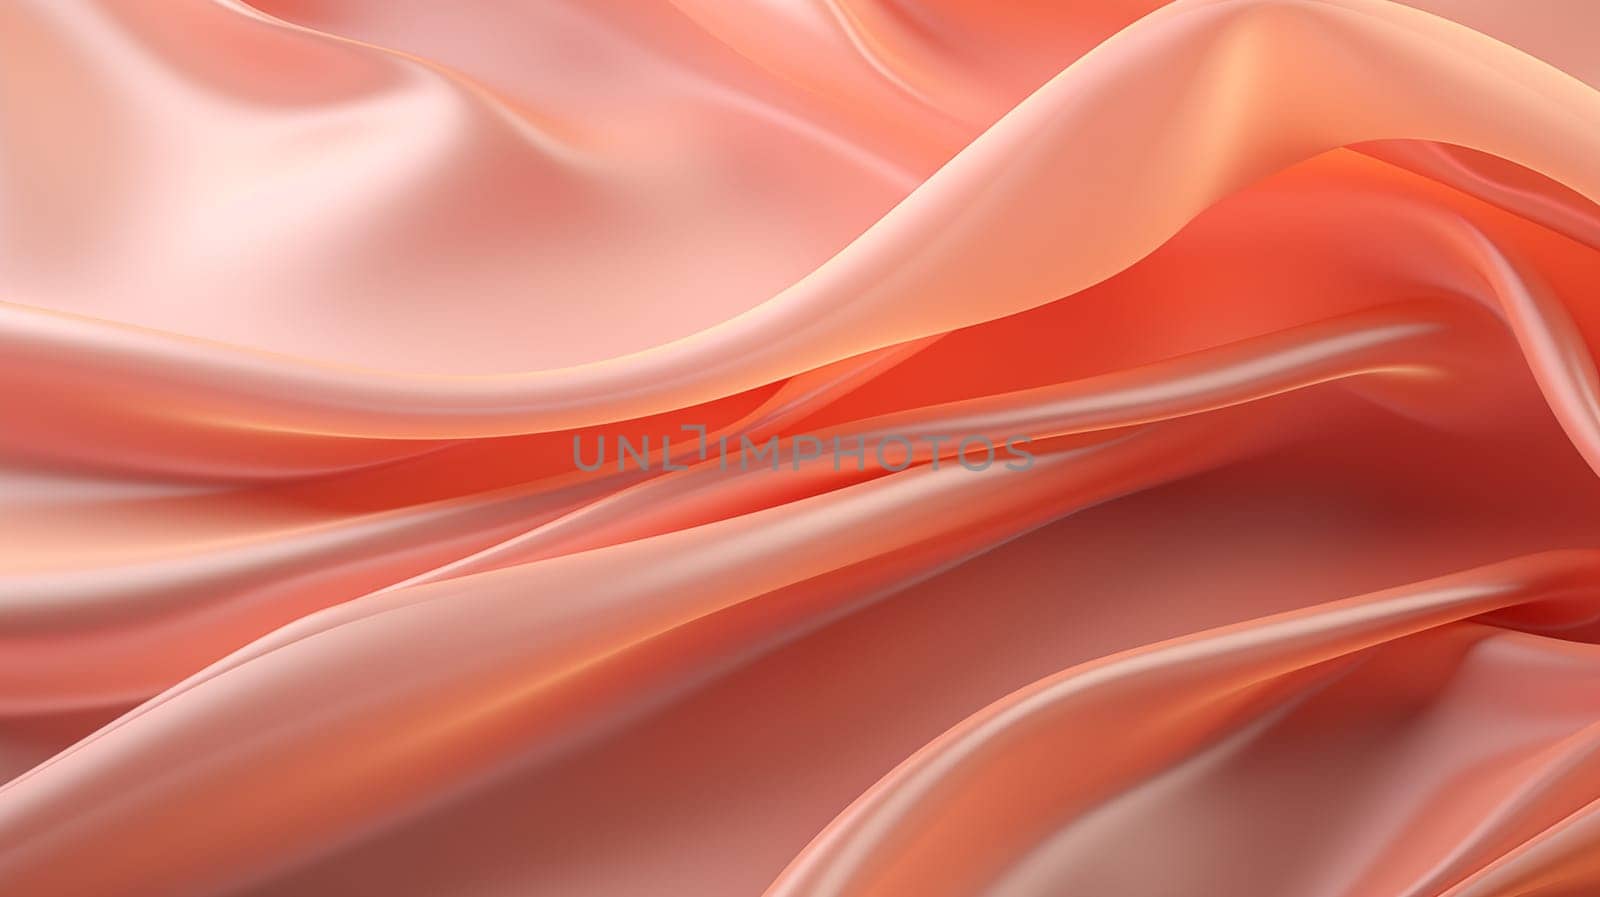 Smooth waves of luxurious peach-fuzz colored silk fabric with a soft, reflective texture by Zakharova